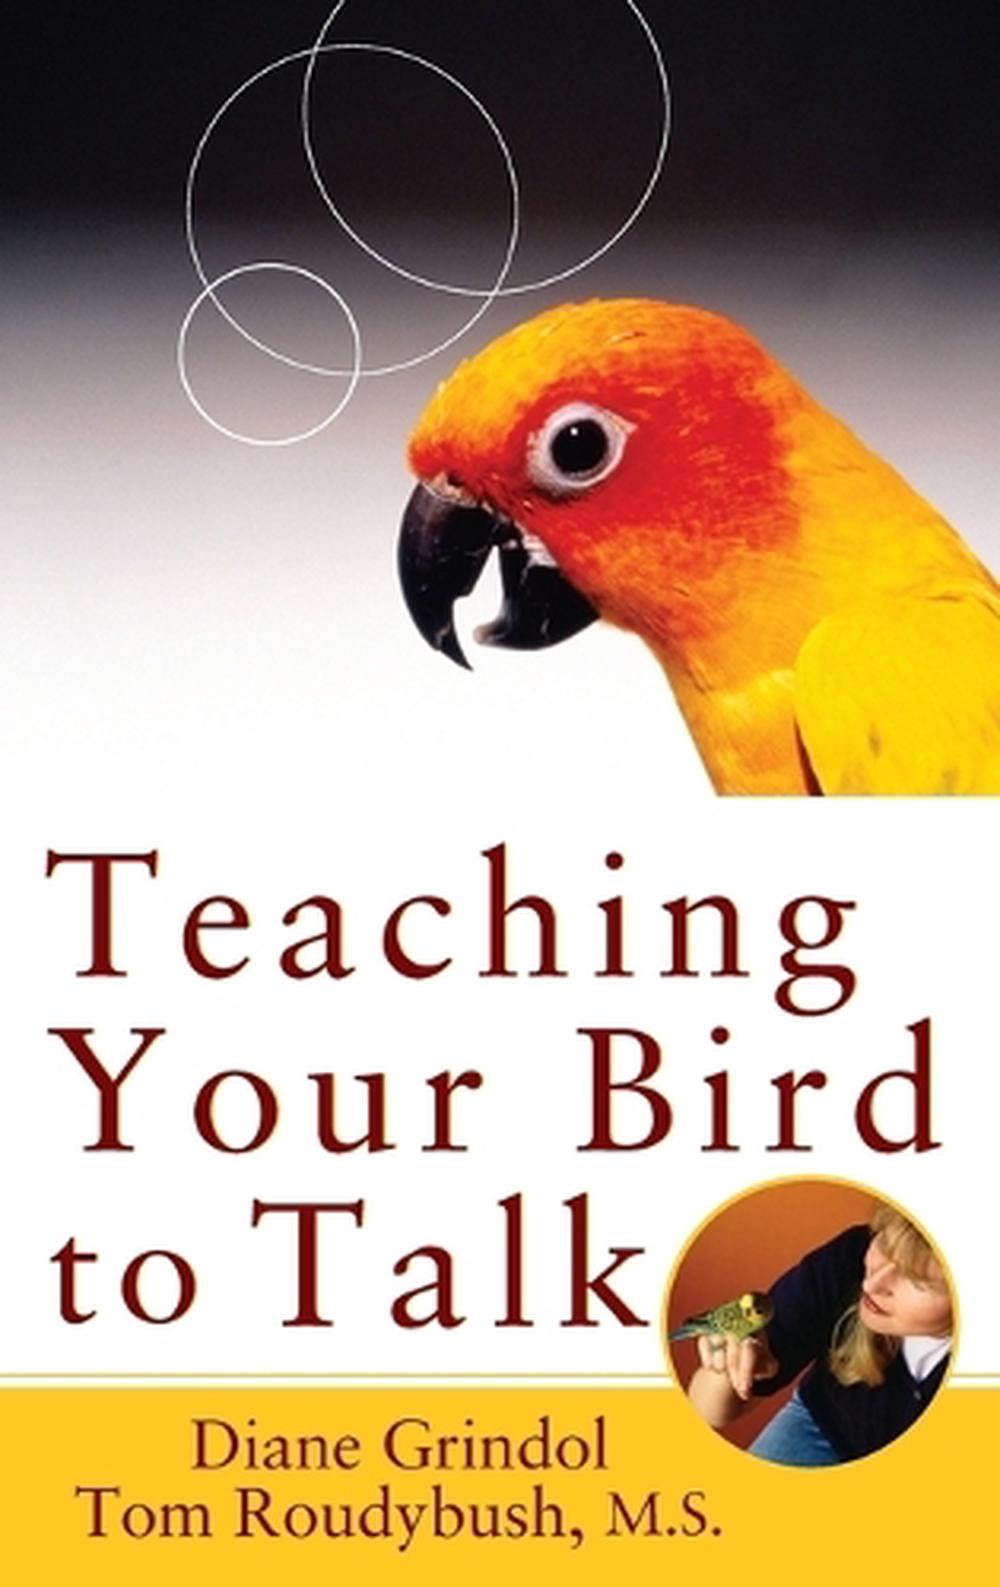 Teaching Your Bird to Talk by Diane Grindol, Hardcover